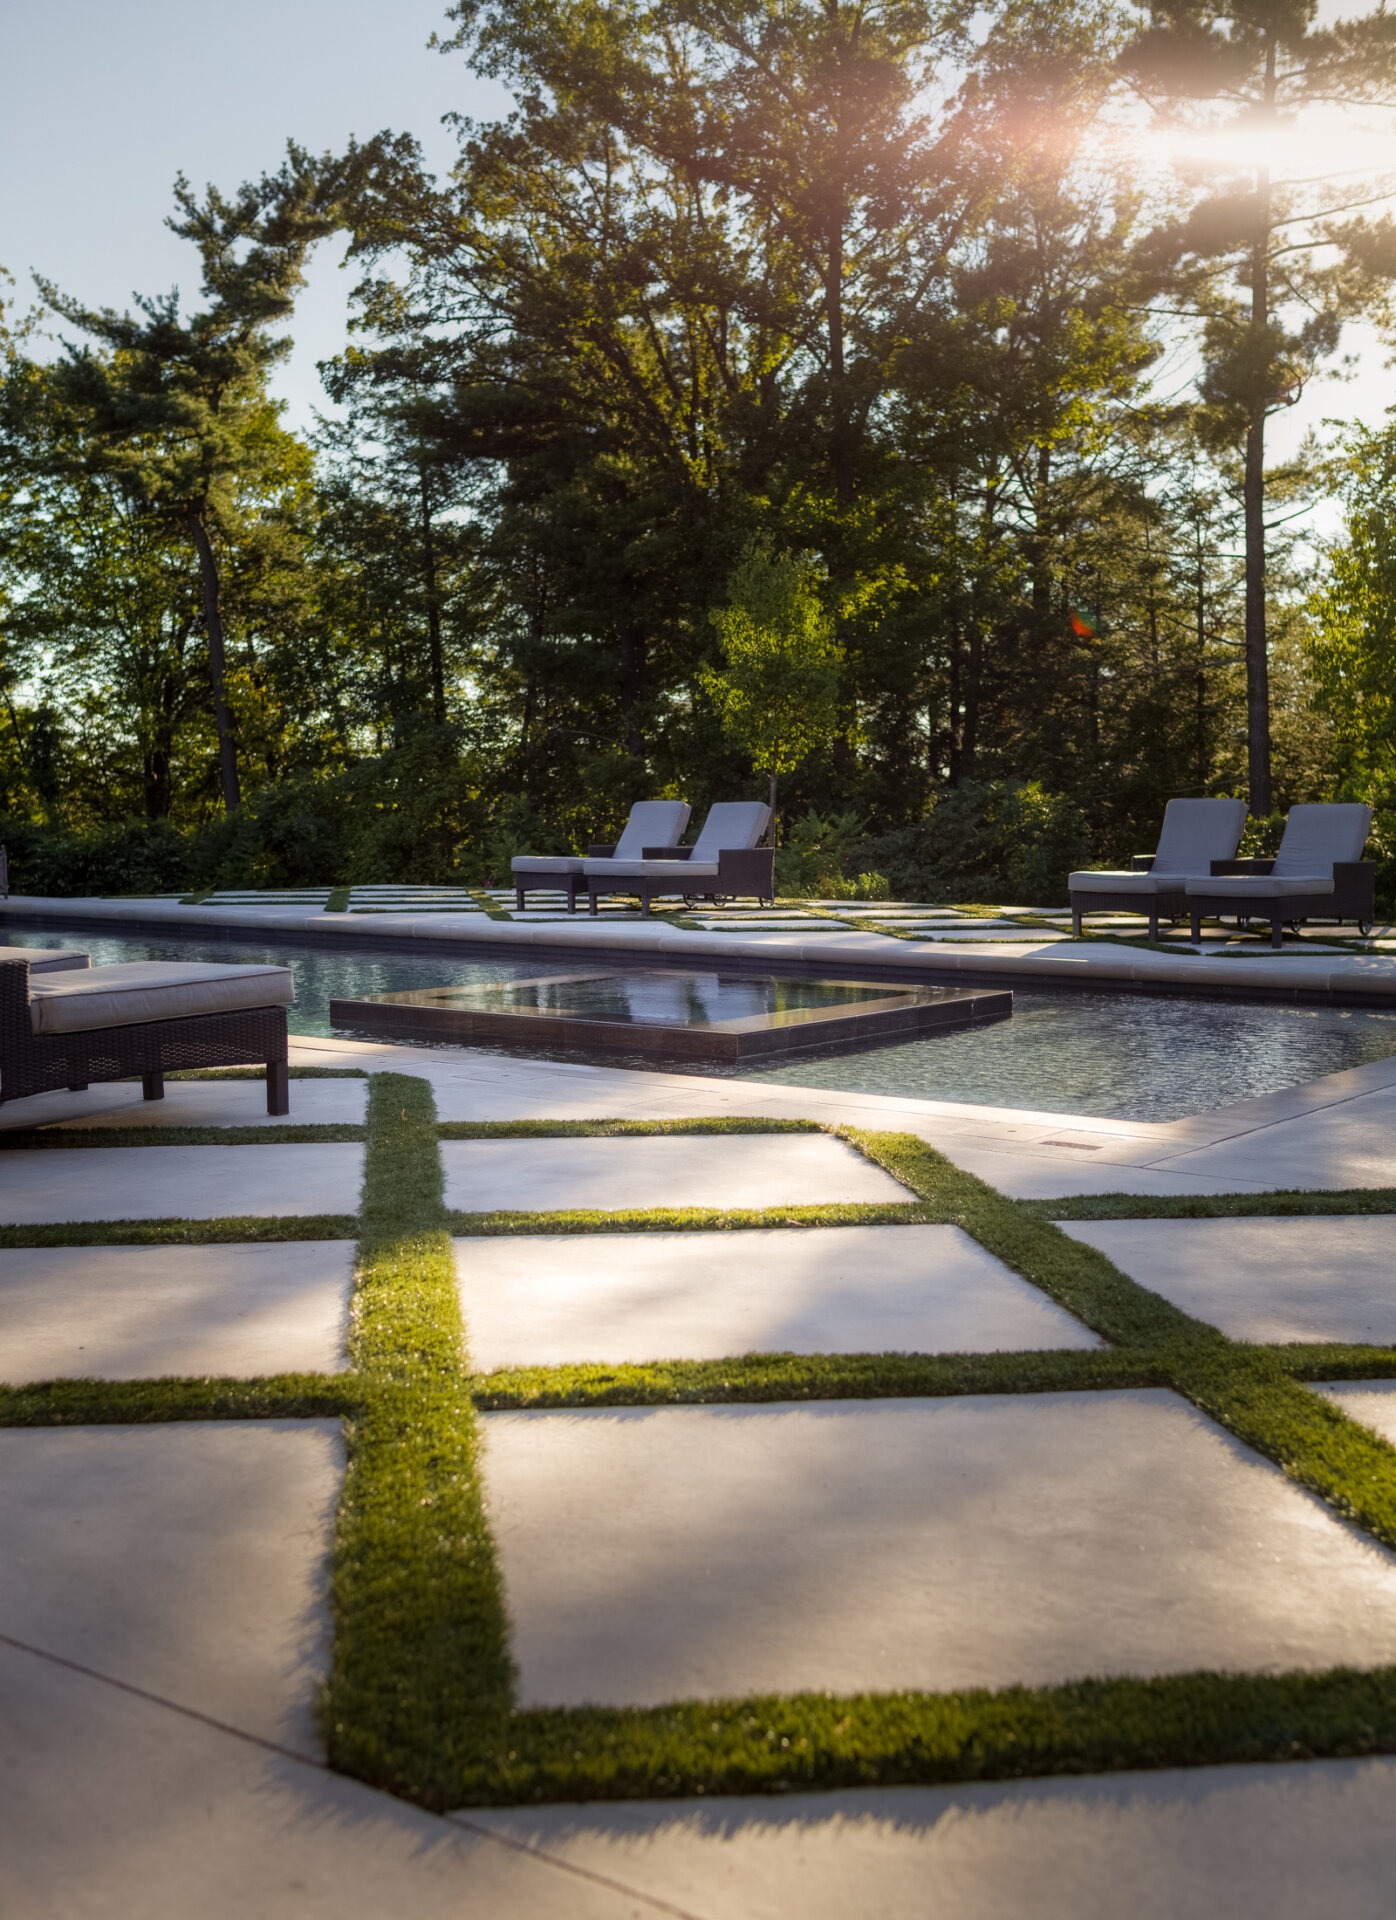 This image shows an outdoor swimming pool surrounded by trees at sunset, with lounge chairs, a woven sofa, and neat grass-bordered stone pathways.